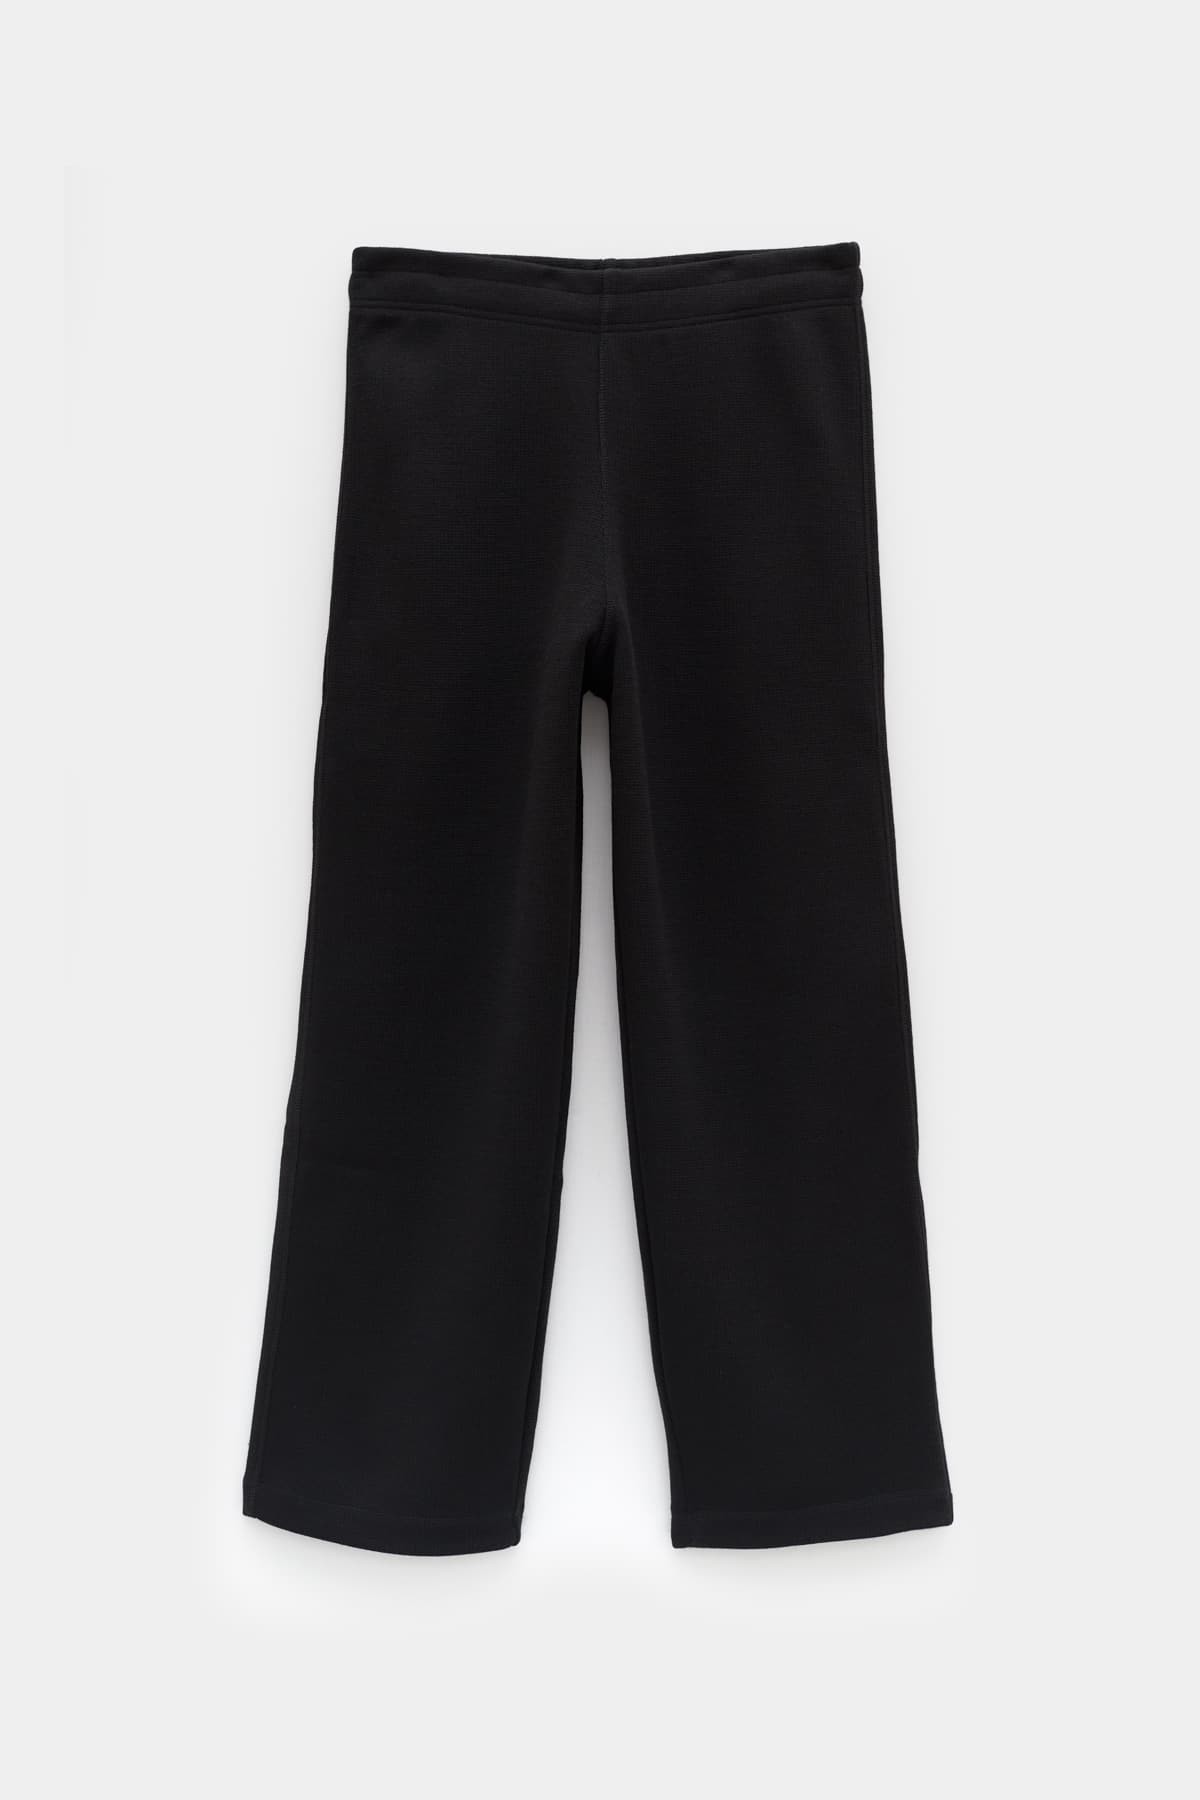 OUR LEGACY BLACK PSEUDO KNIT REDUCED TROUSER IAMNUE